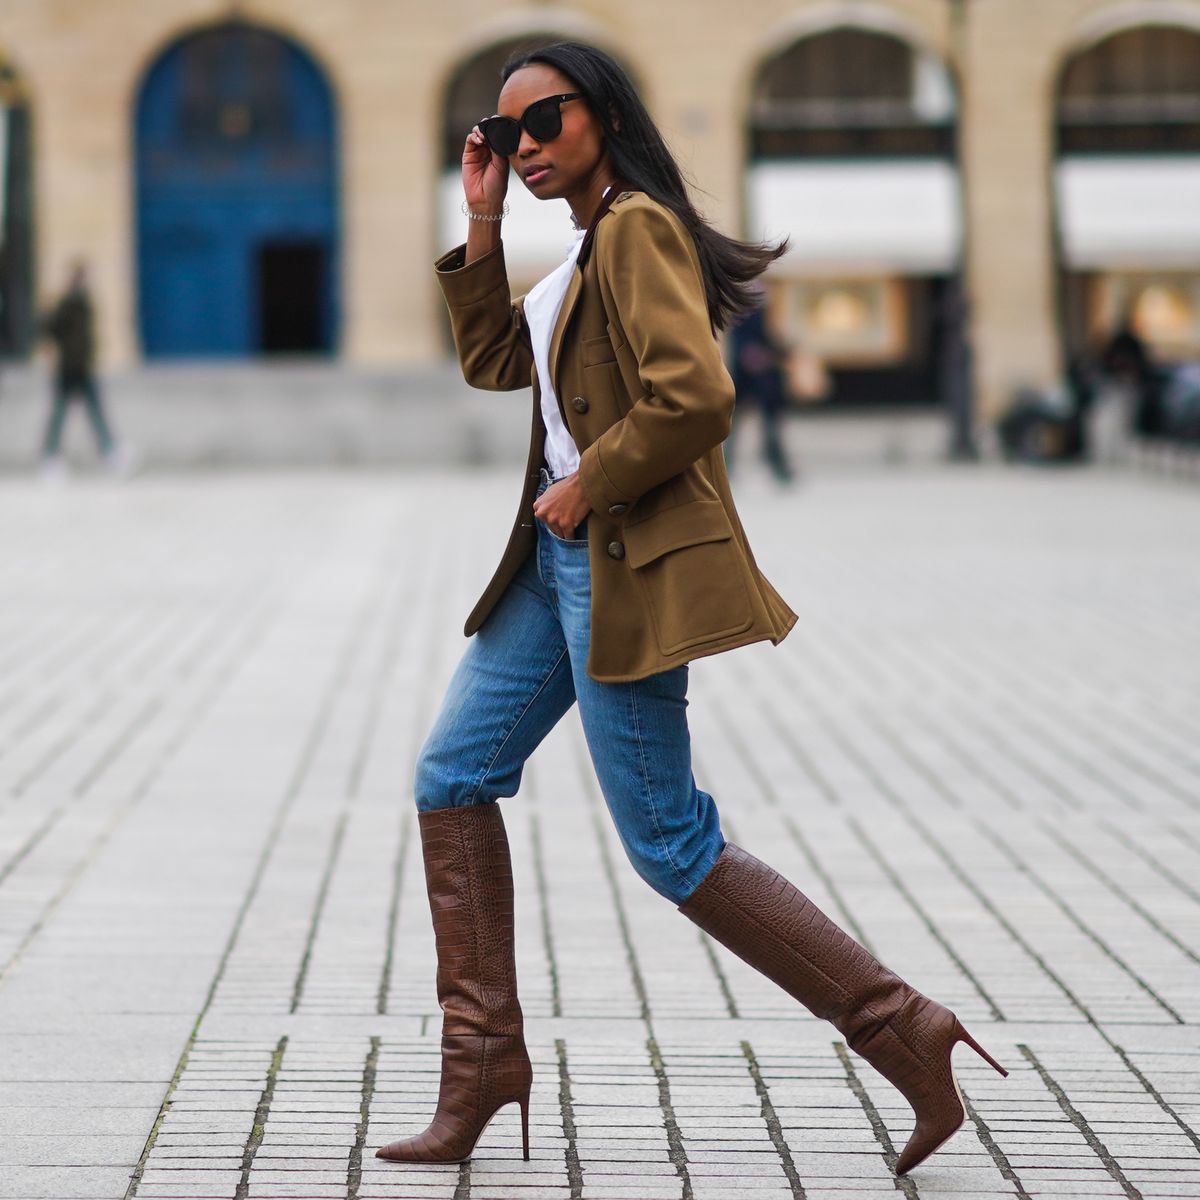 How To Style Knee-High Boots This Season – Best Knee-High Boots